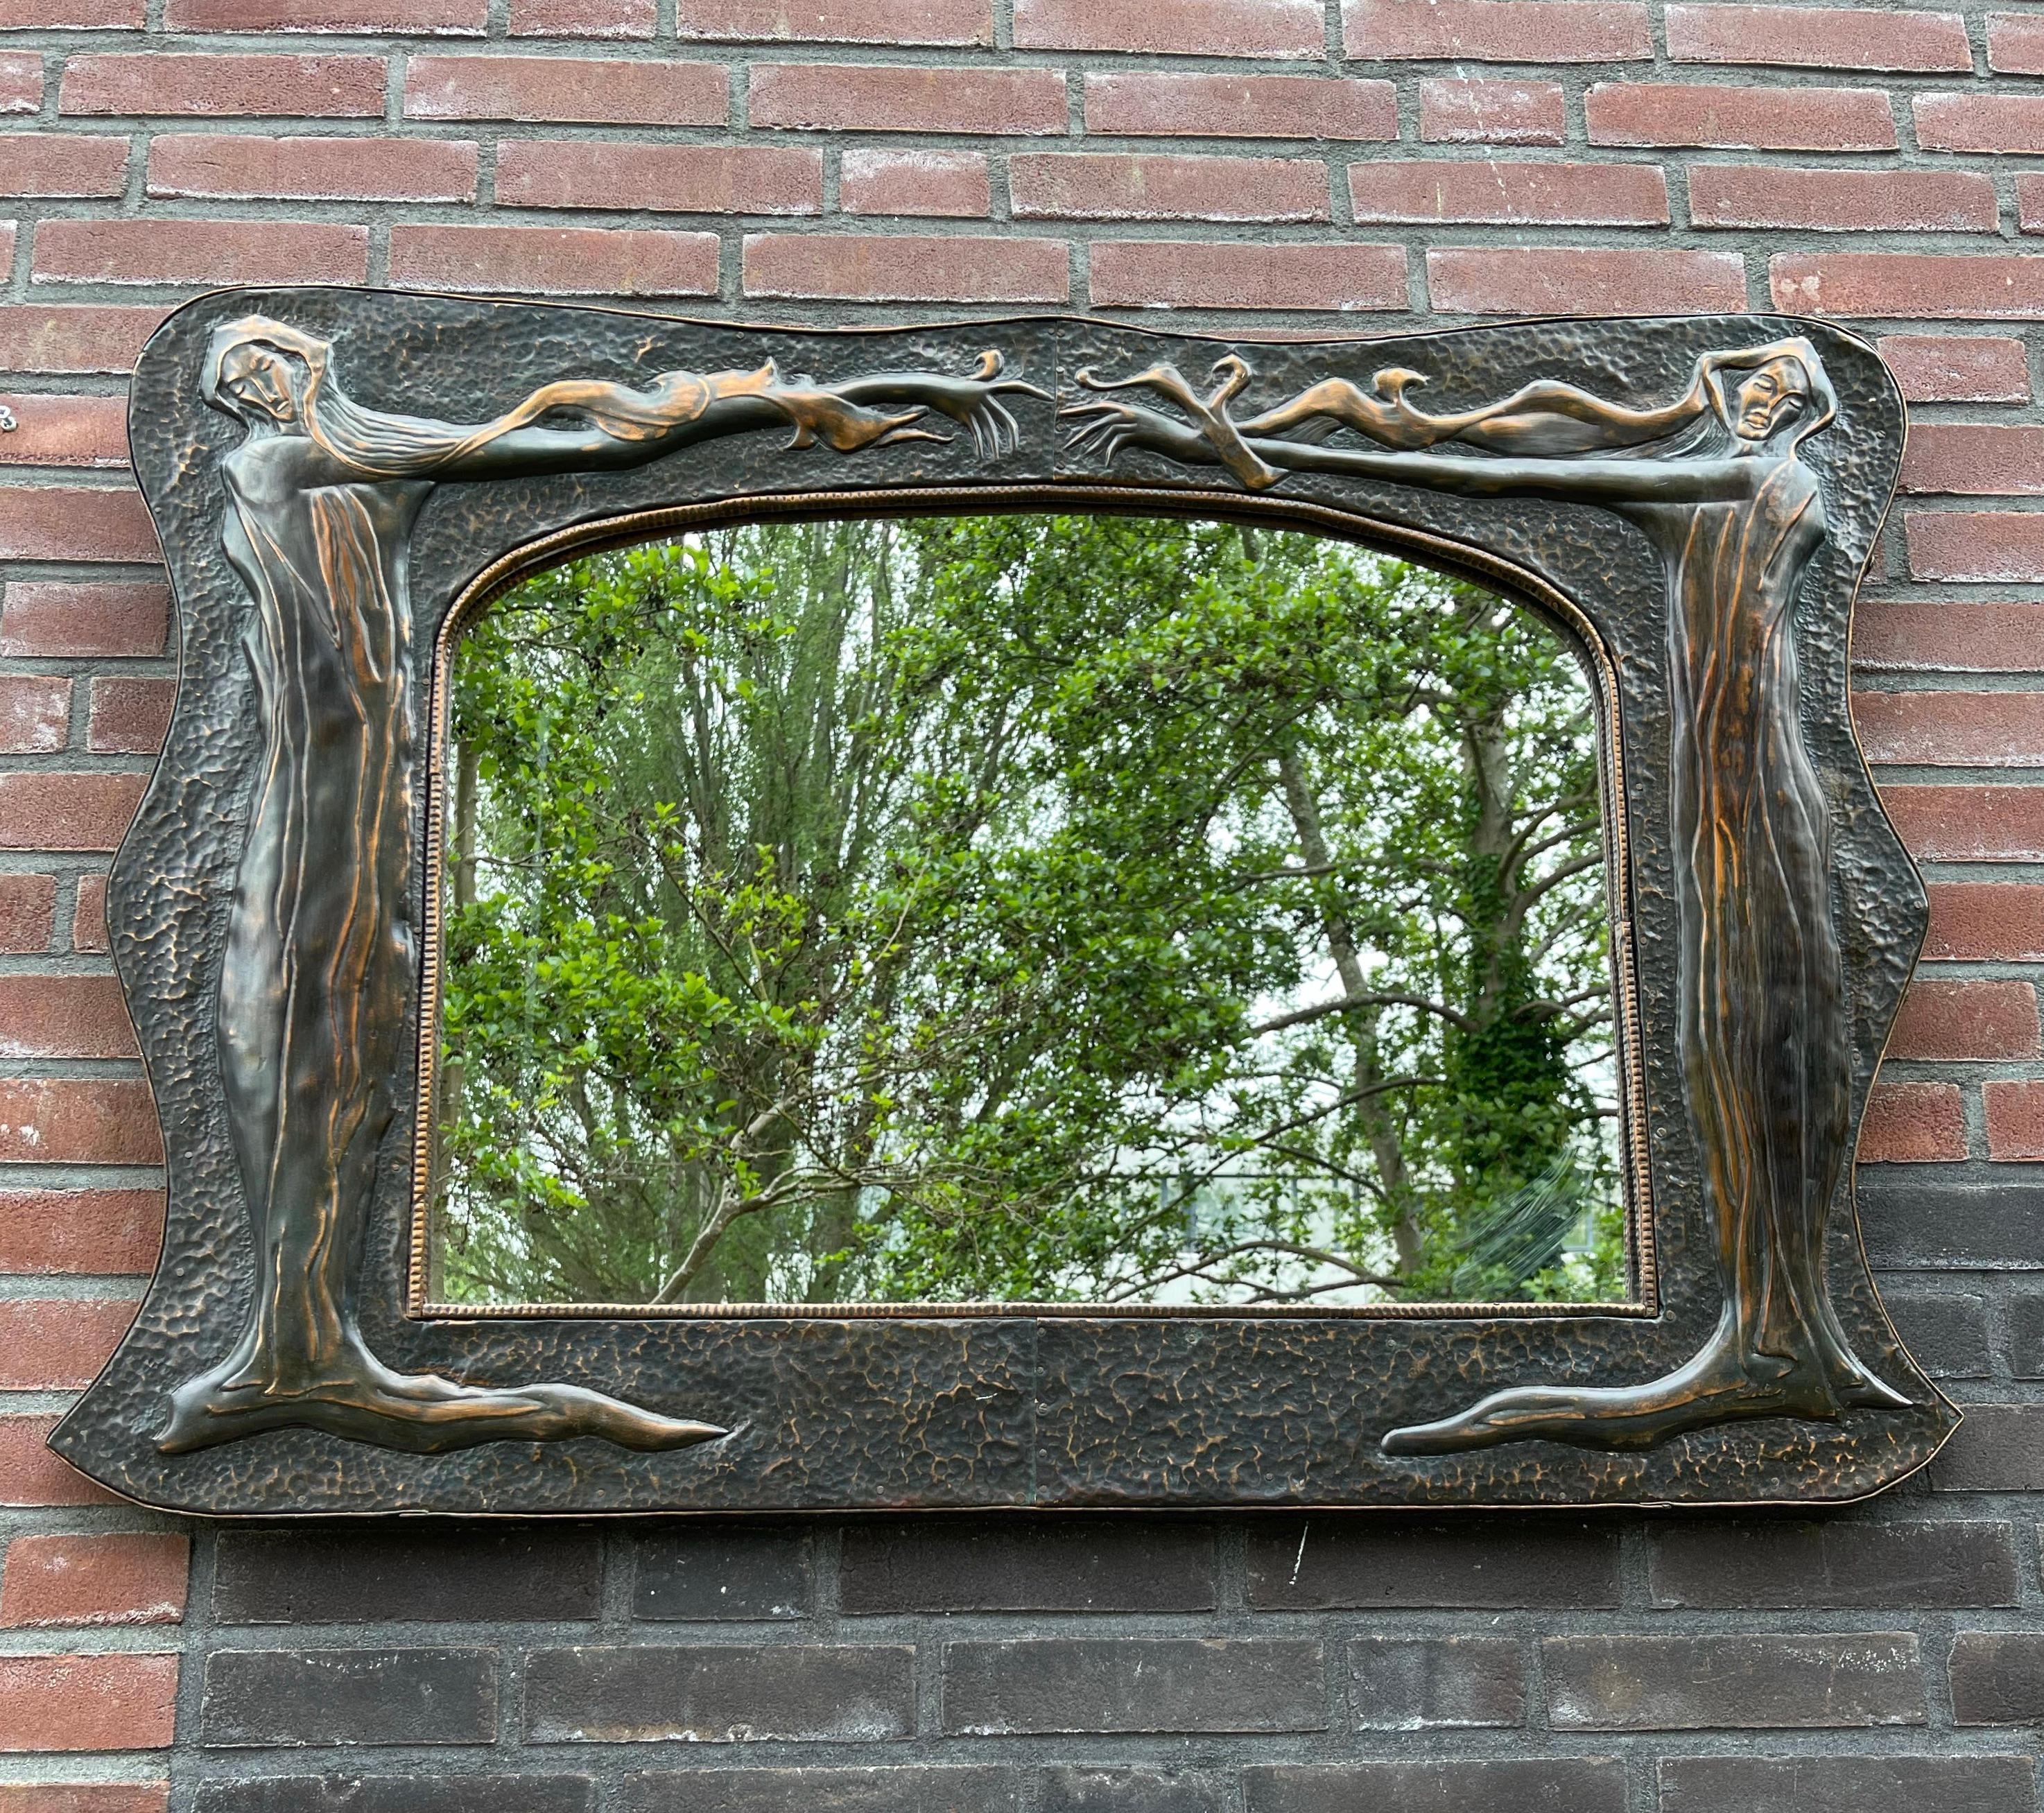 Exceptional design and meaningful wall mirror.

This sizeable and unique wall mirror comes with perfectly embossed, stylized nymph sculptures on either side. For those who did not yet know: a nymph is a mythological spirit of nature imagined as a